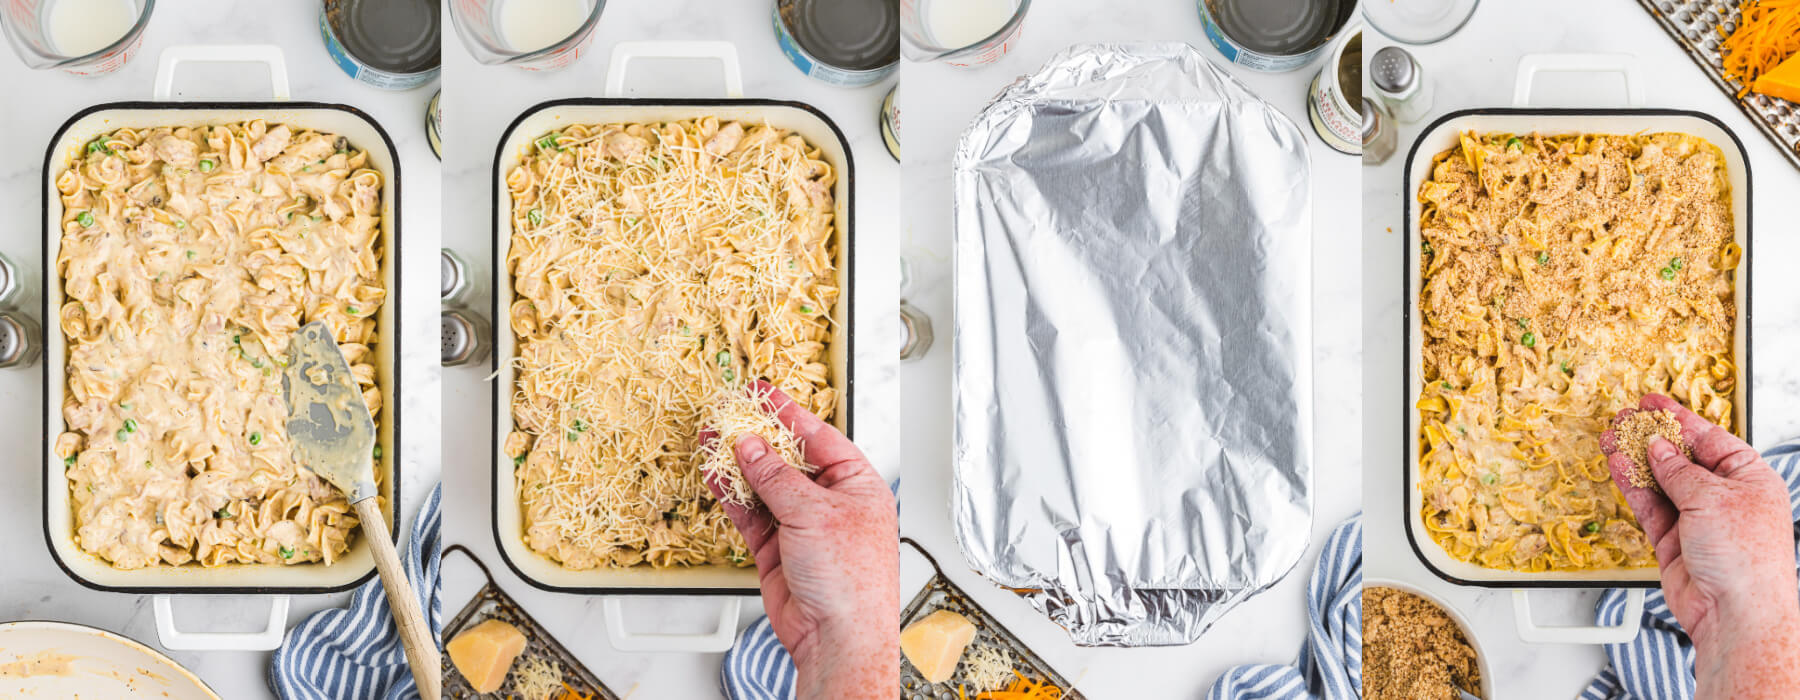 A series of process images showing how to add the top layer of cheese and breadcrumbs on a casserole before baking.